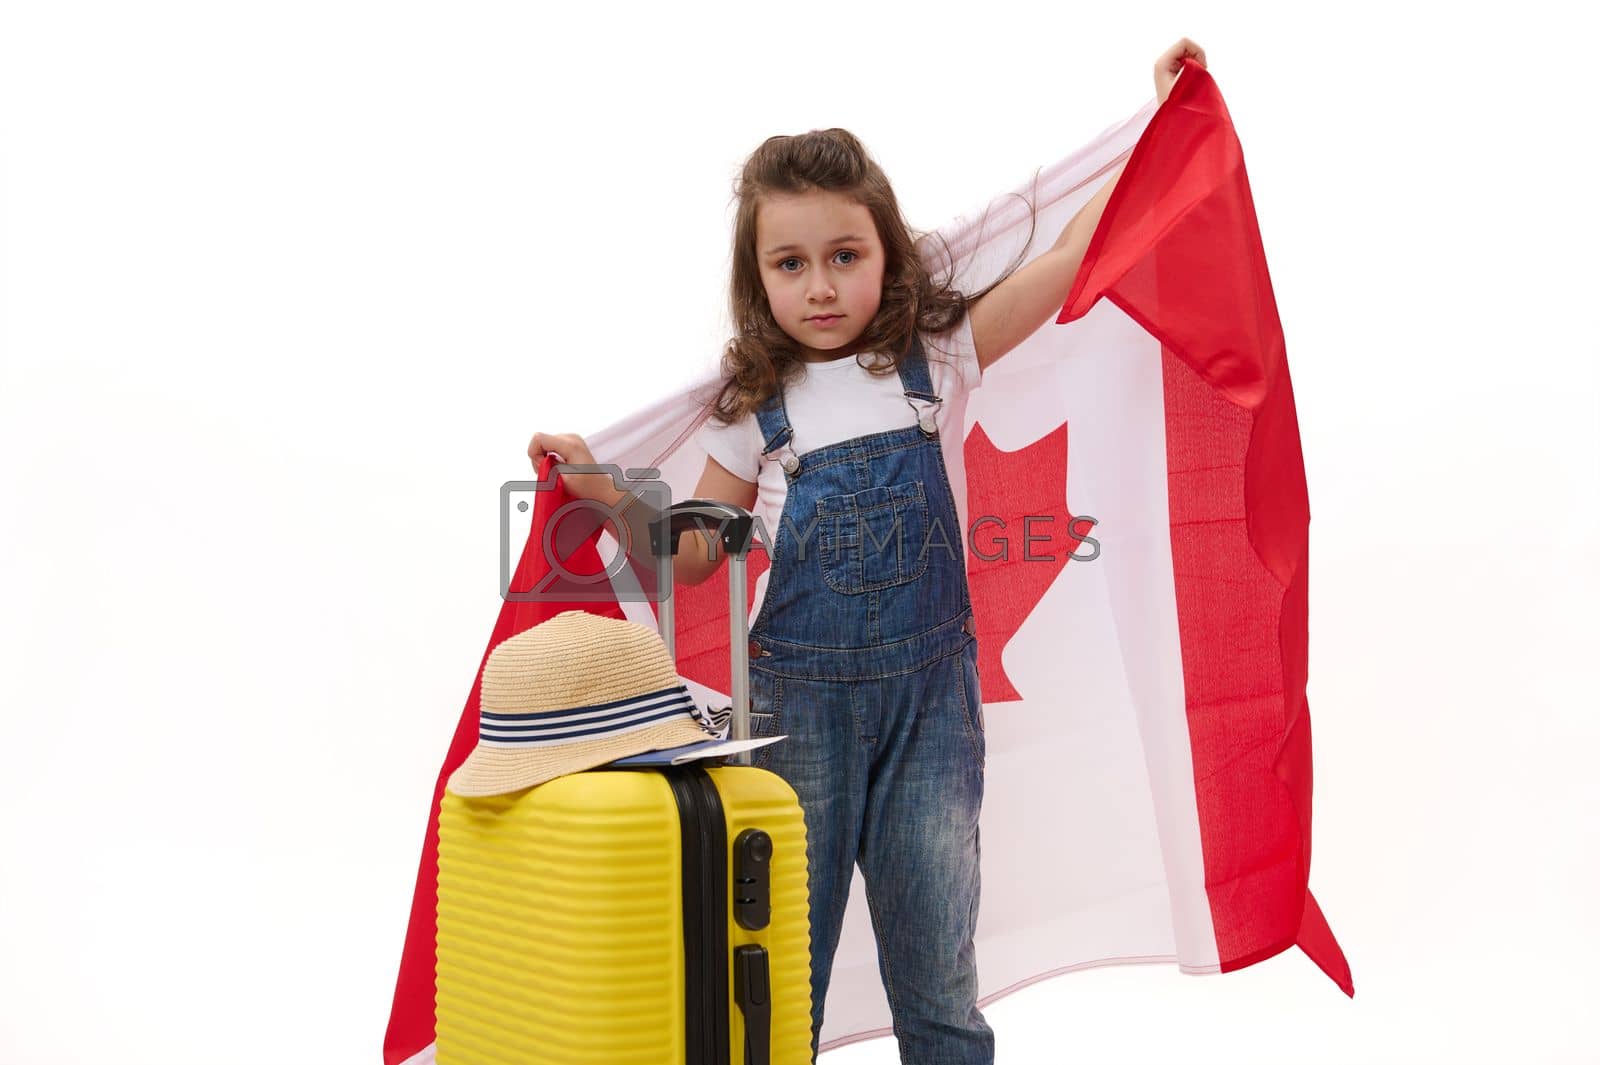 Royalty free image of Little girl in white t-shirt and blue denim overalls, carrying Canada flag, poses with yellow suitcase, white background by artgf